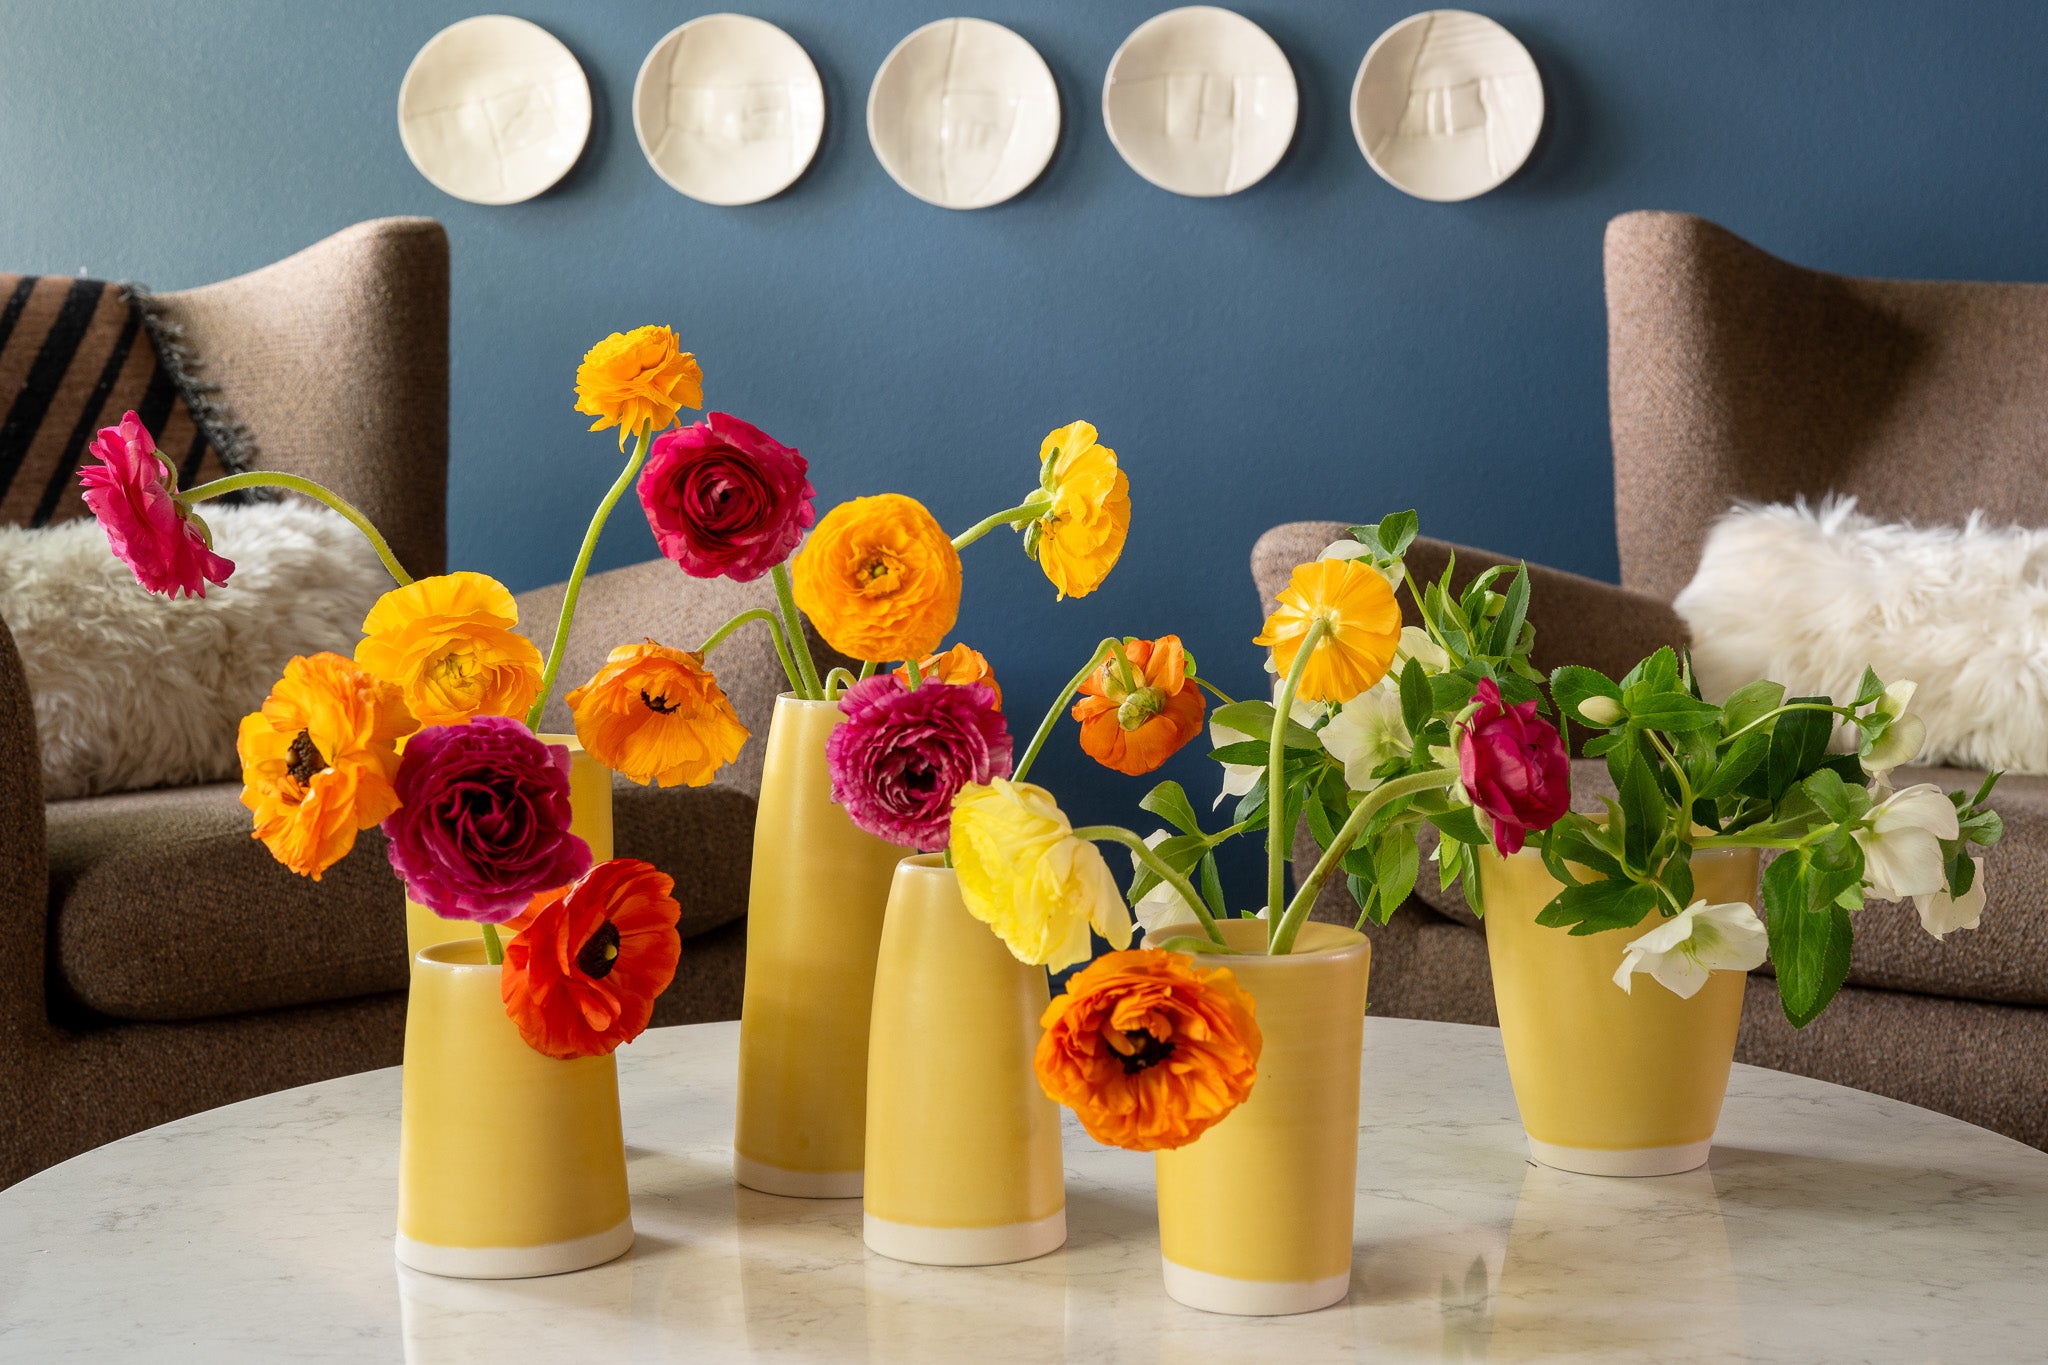 One-of-a-Kind Set of Vases